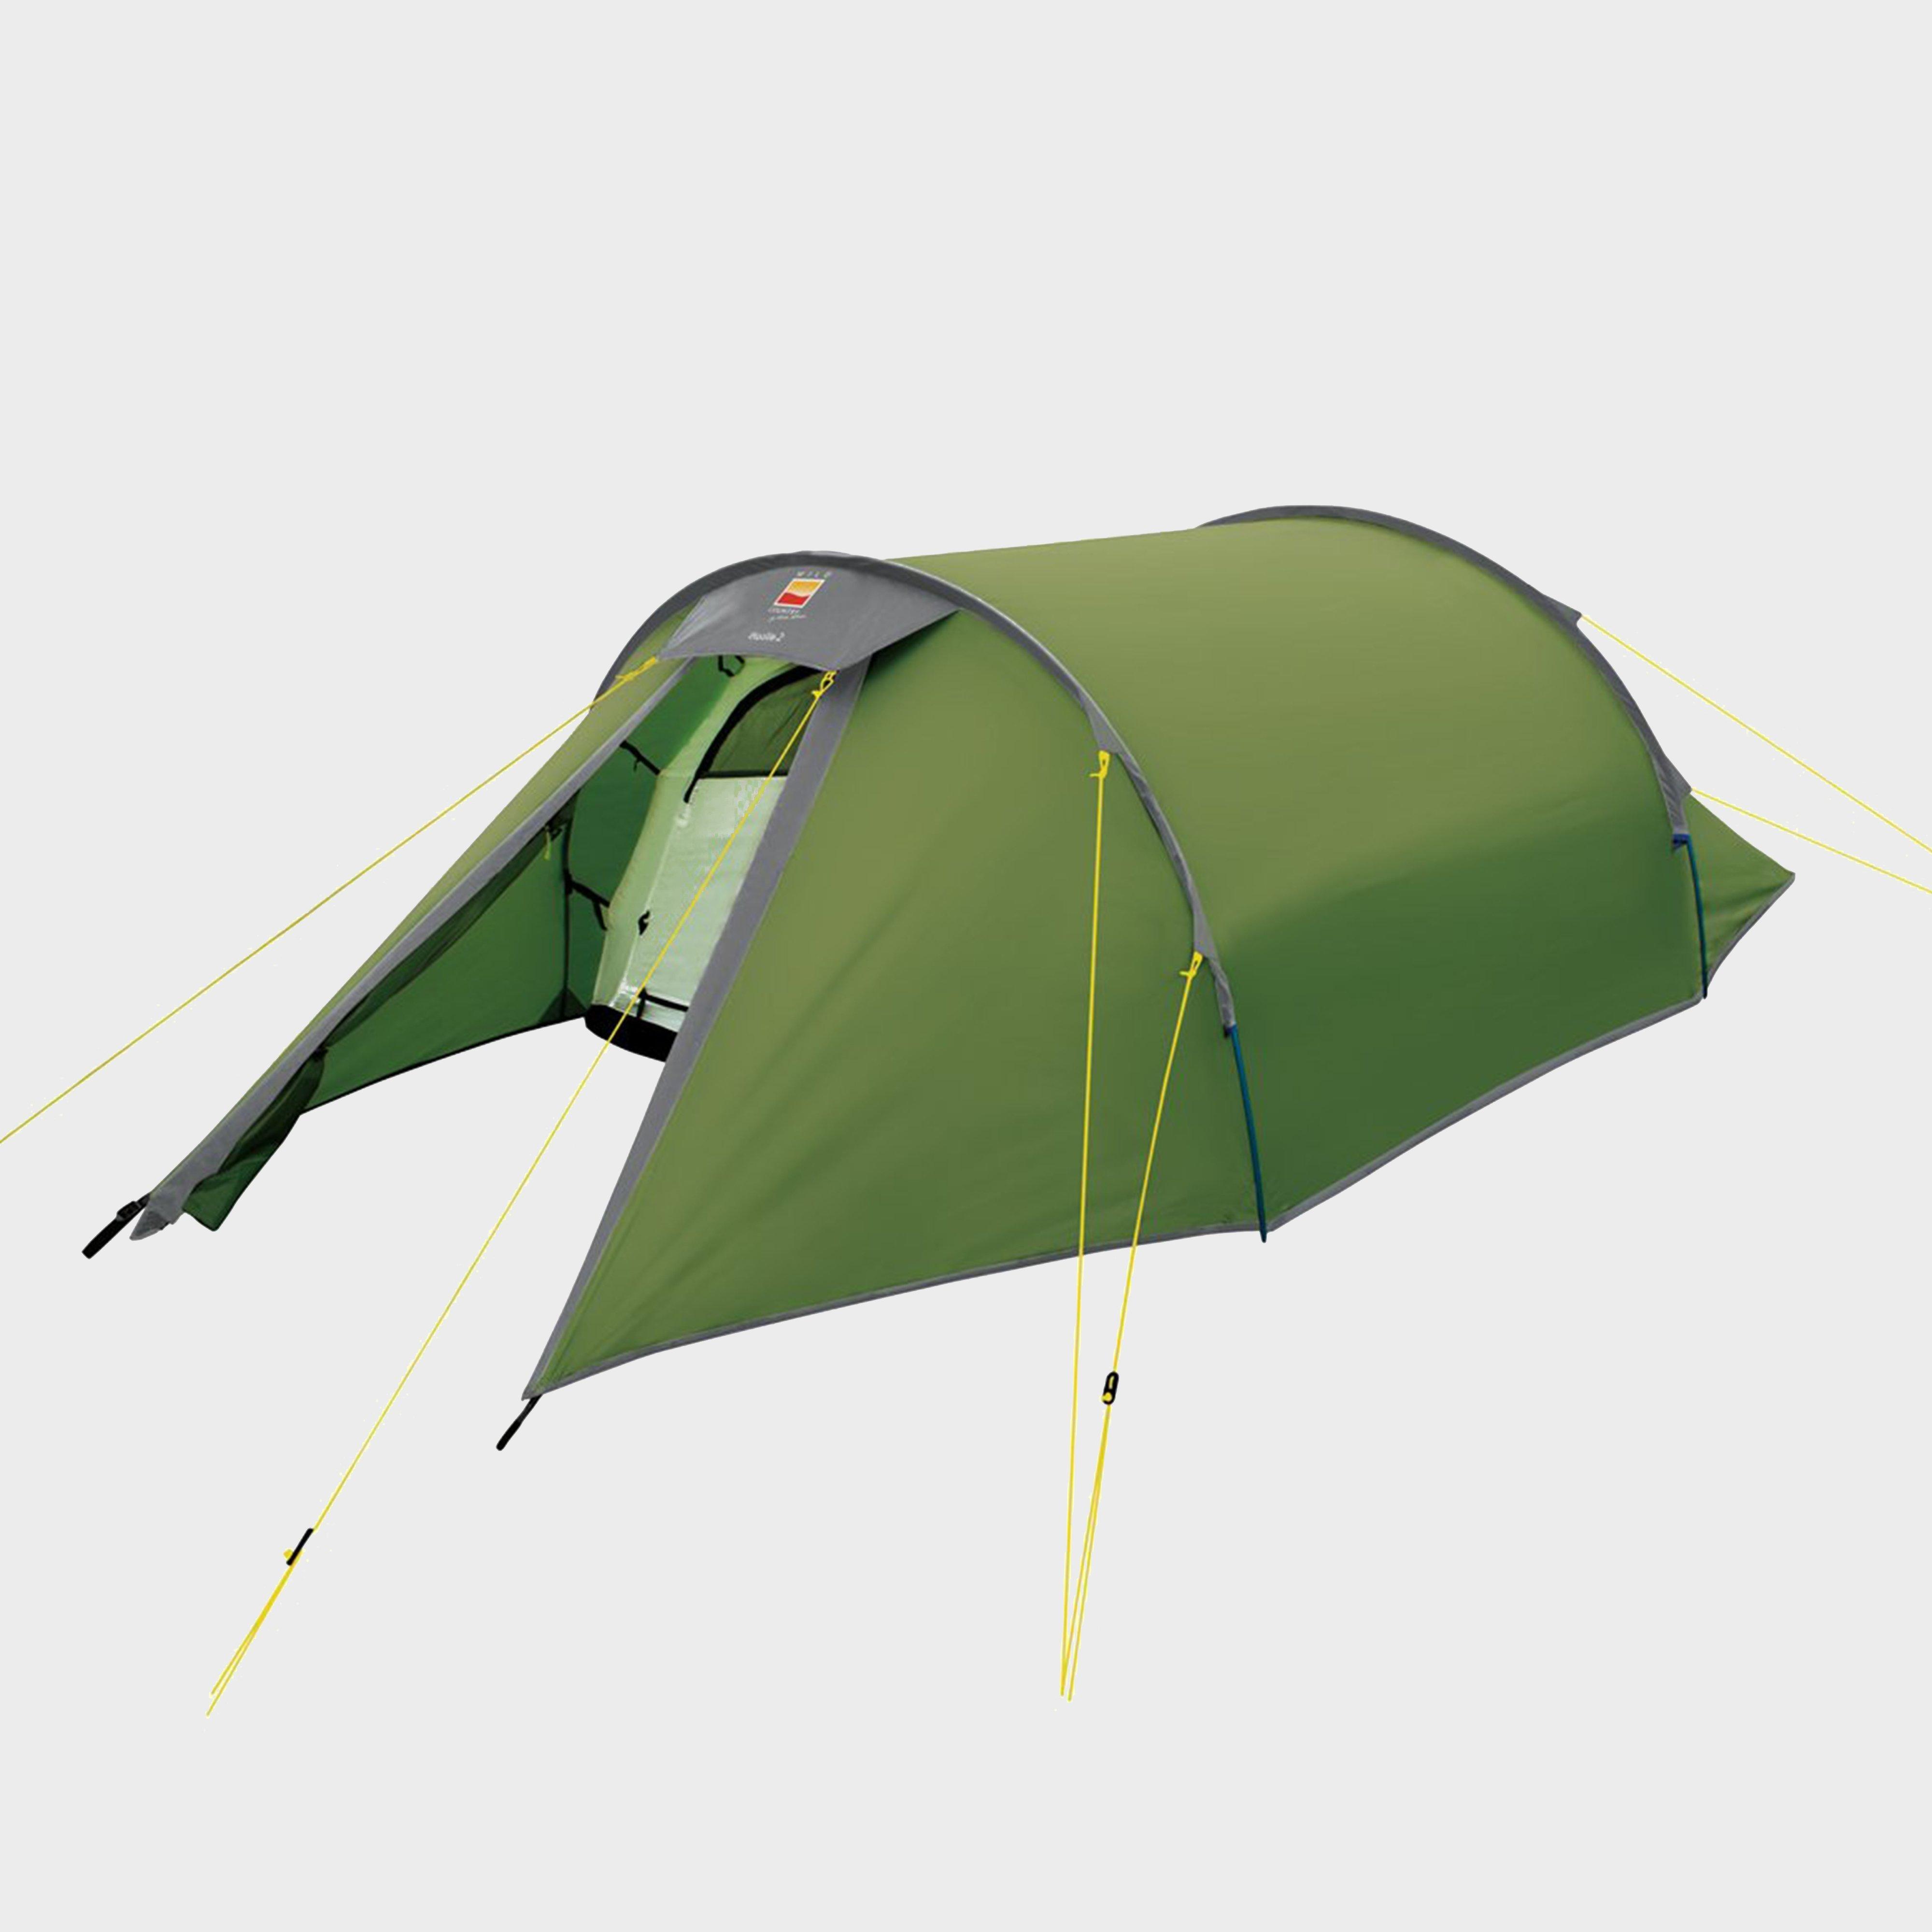 Wild Country Hoolie Compact 2 Tent - Green/mgn  Green/mgn